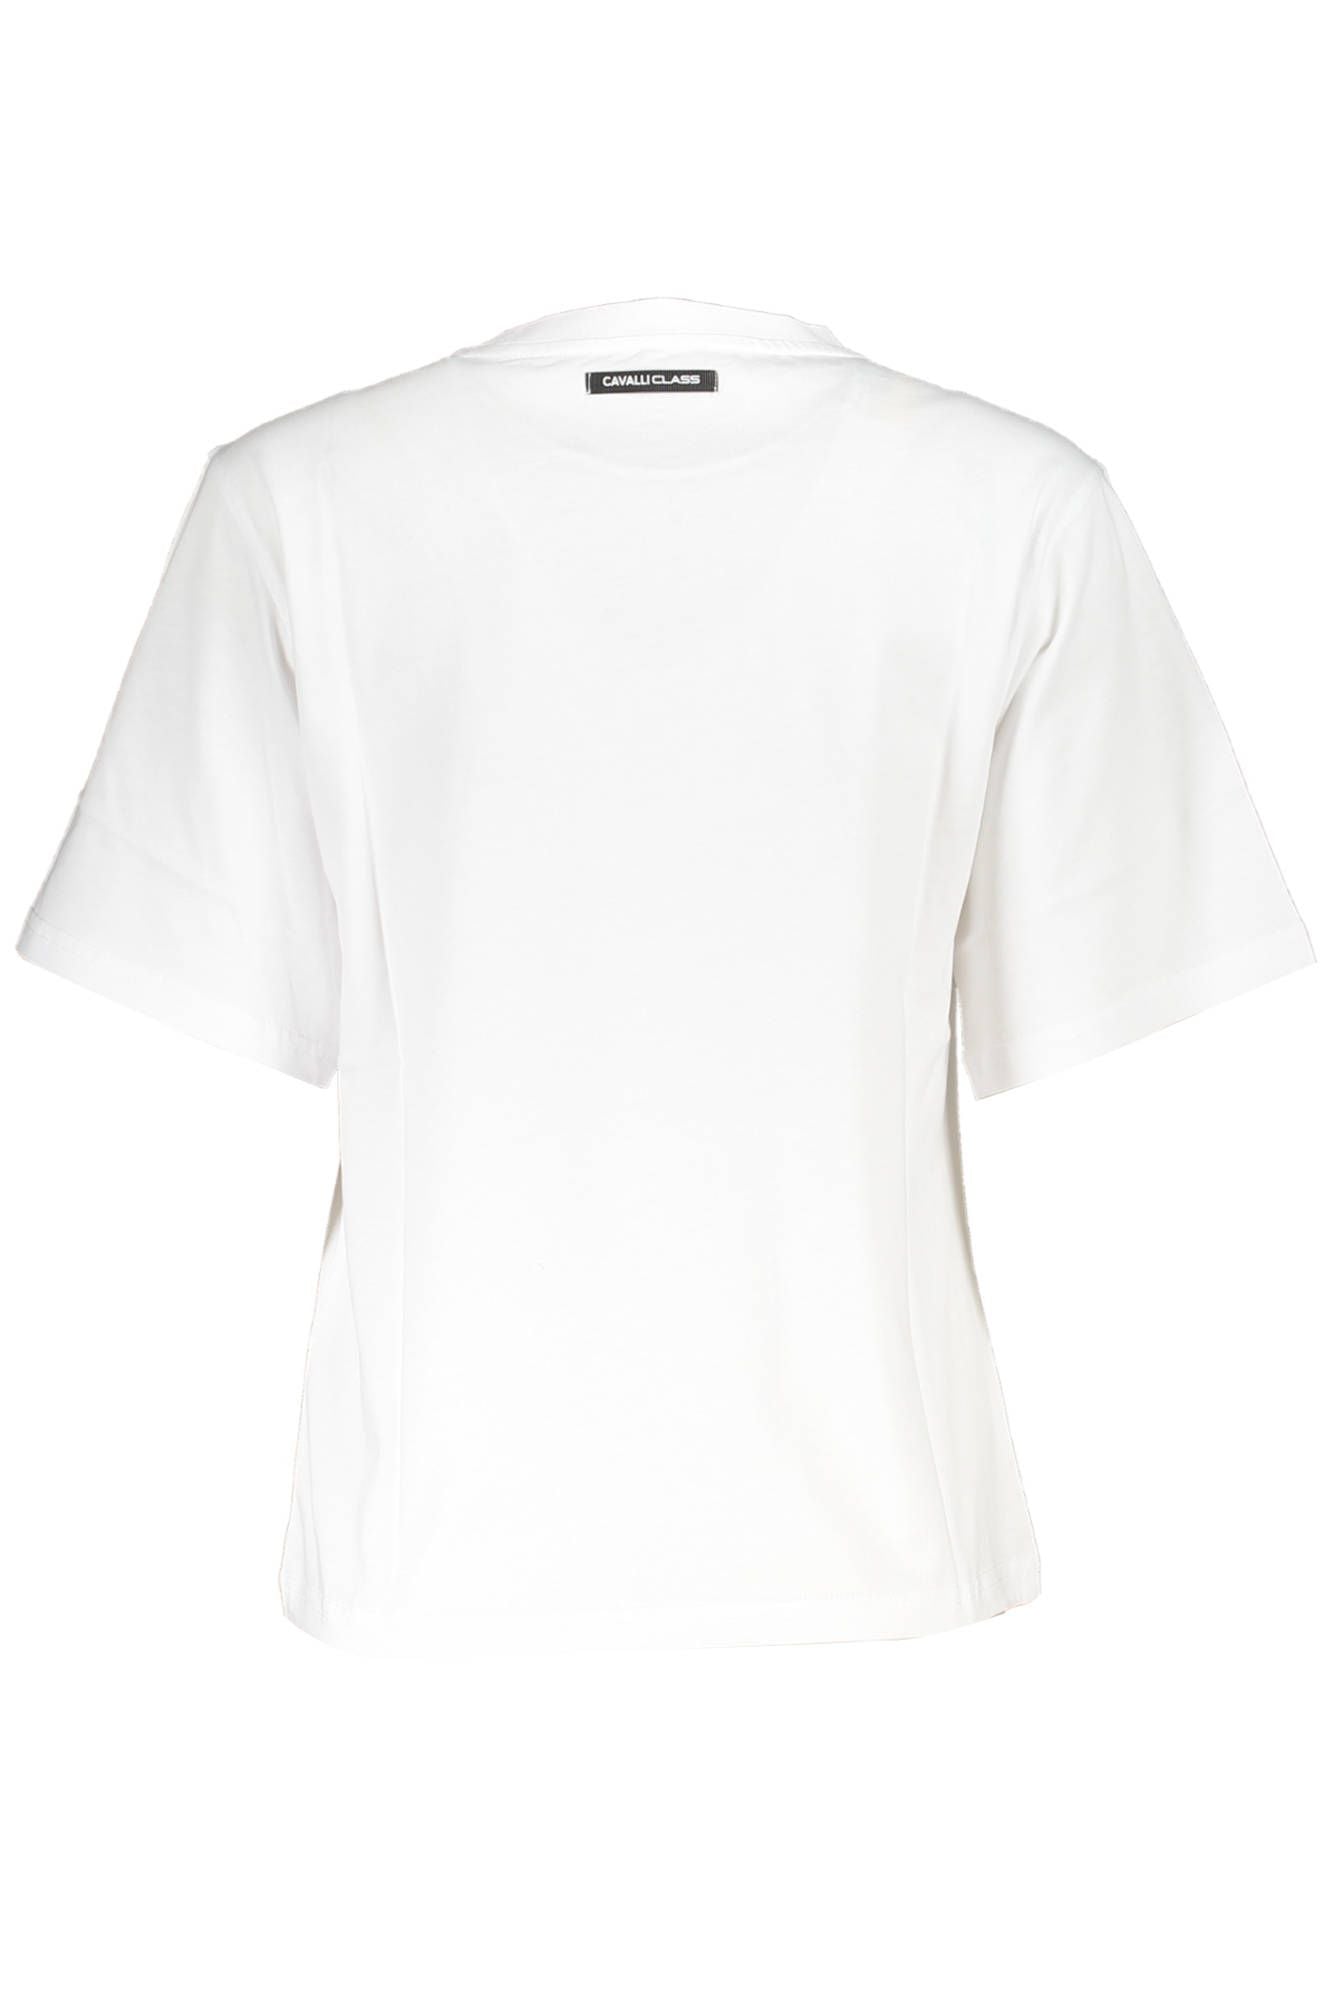 Cavalli Class Chic White Printed Cotton Tee with Designer Flair